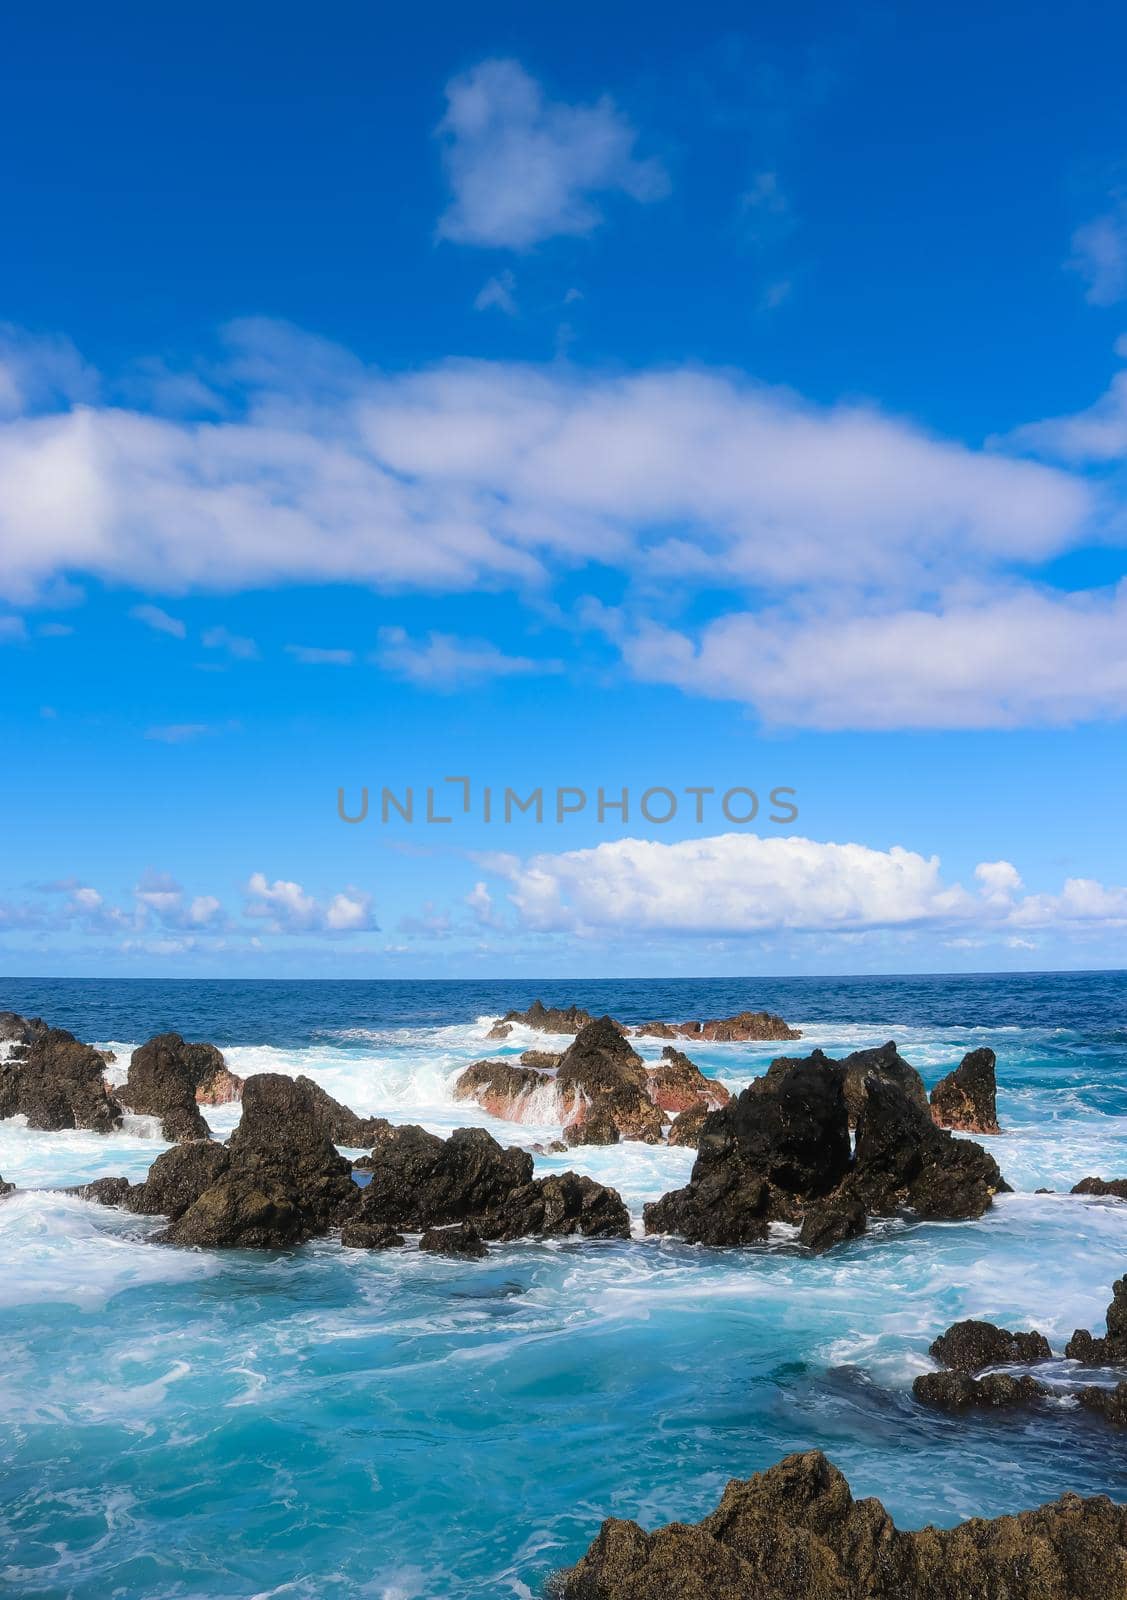 Waves crashing among the turquoise water rock pools of the island of Madeira, Portugal. by olifrenchphoto